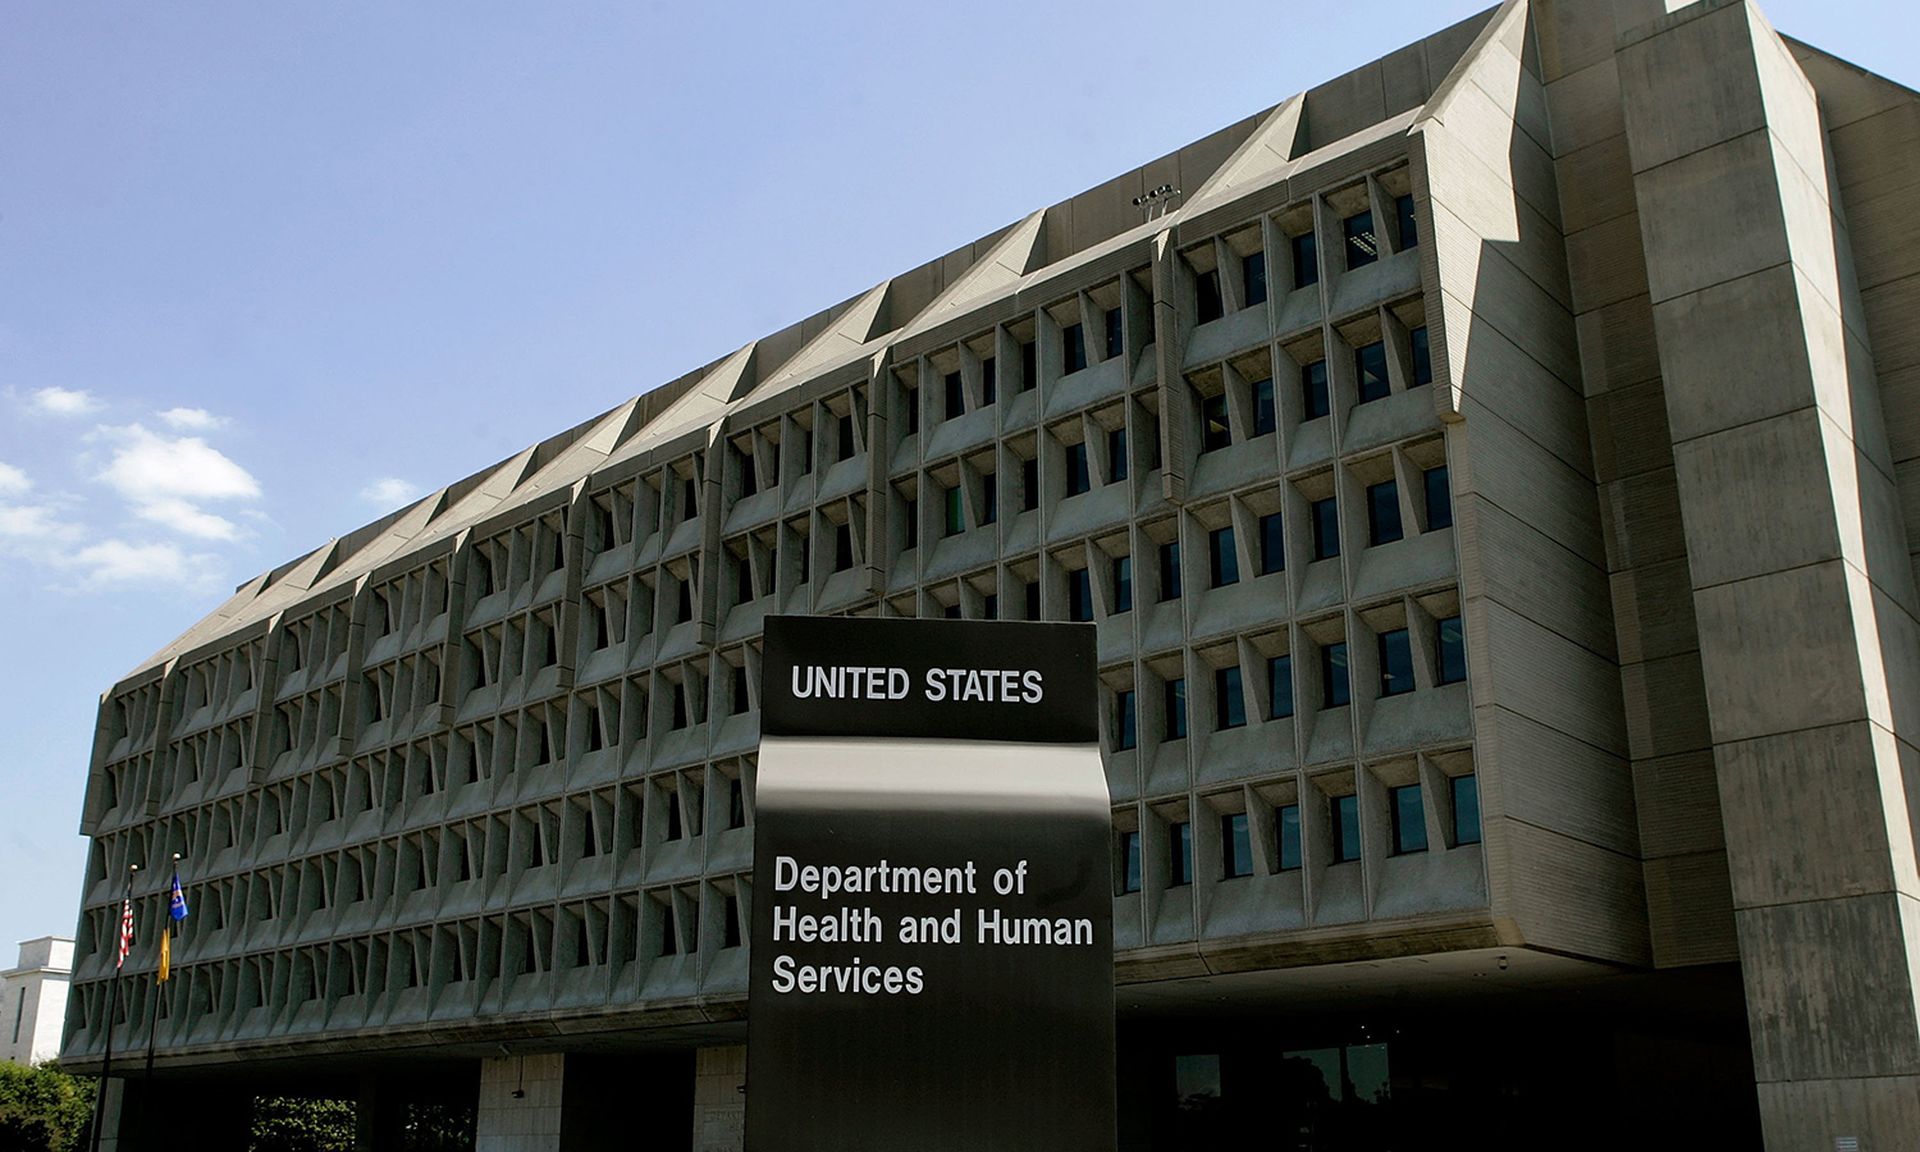 The  U.S. Department of Health and Human Services building is shown Aug. 16, 2006, in Washington. (Photo by Mark Wilson/Getty Images)